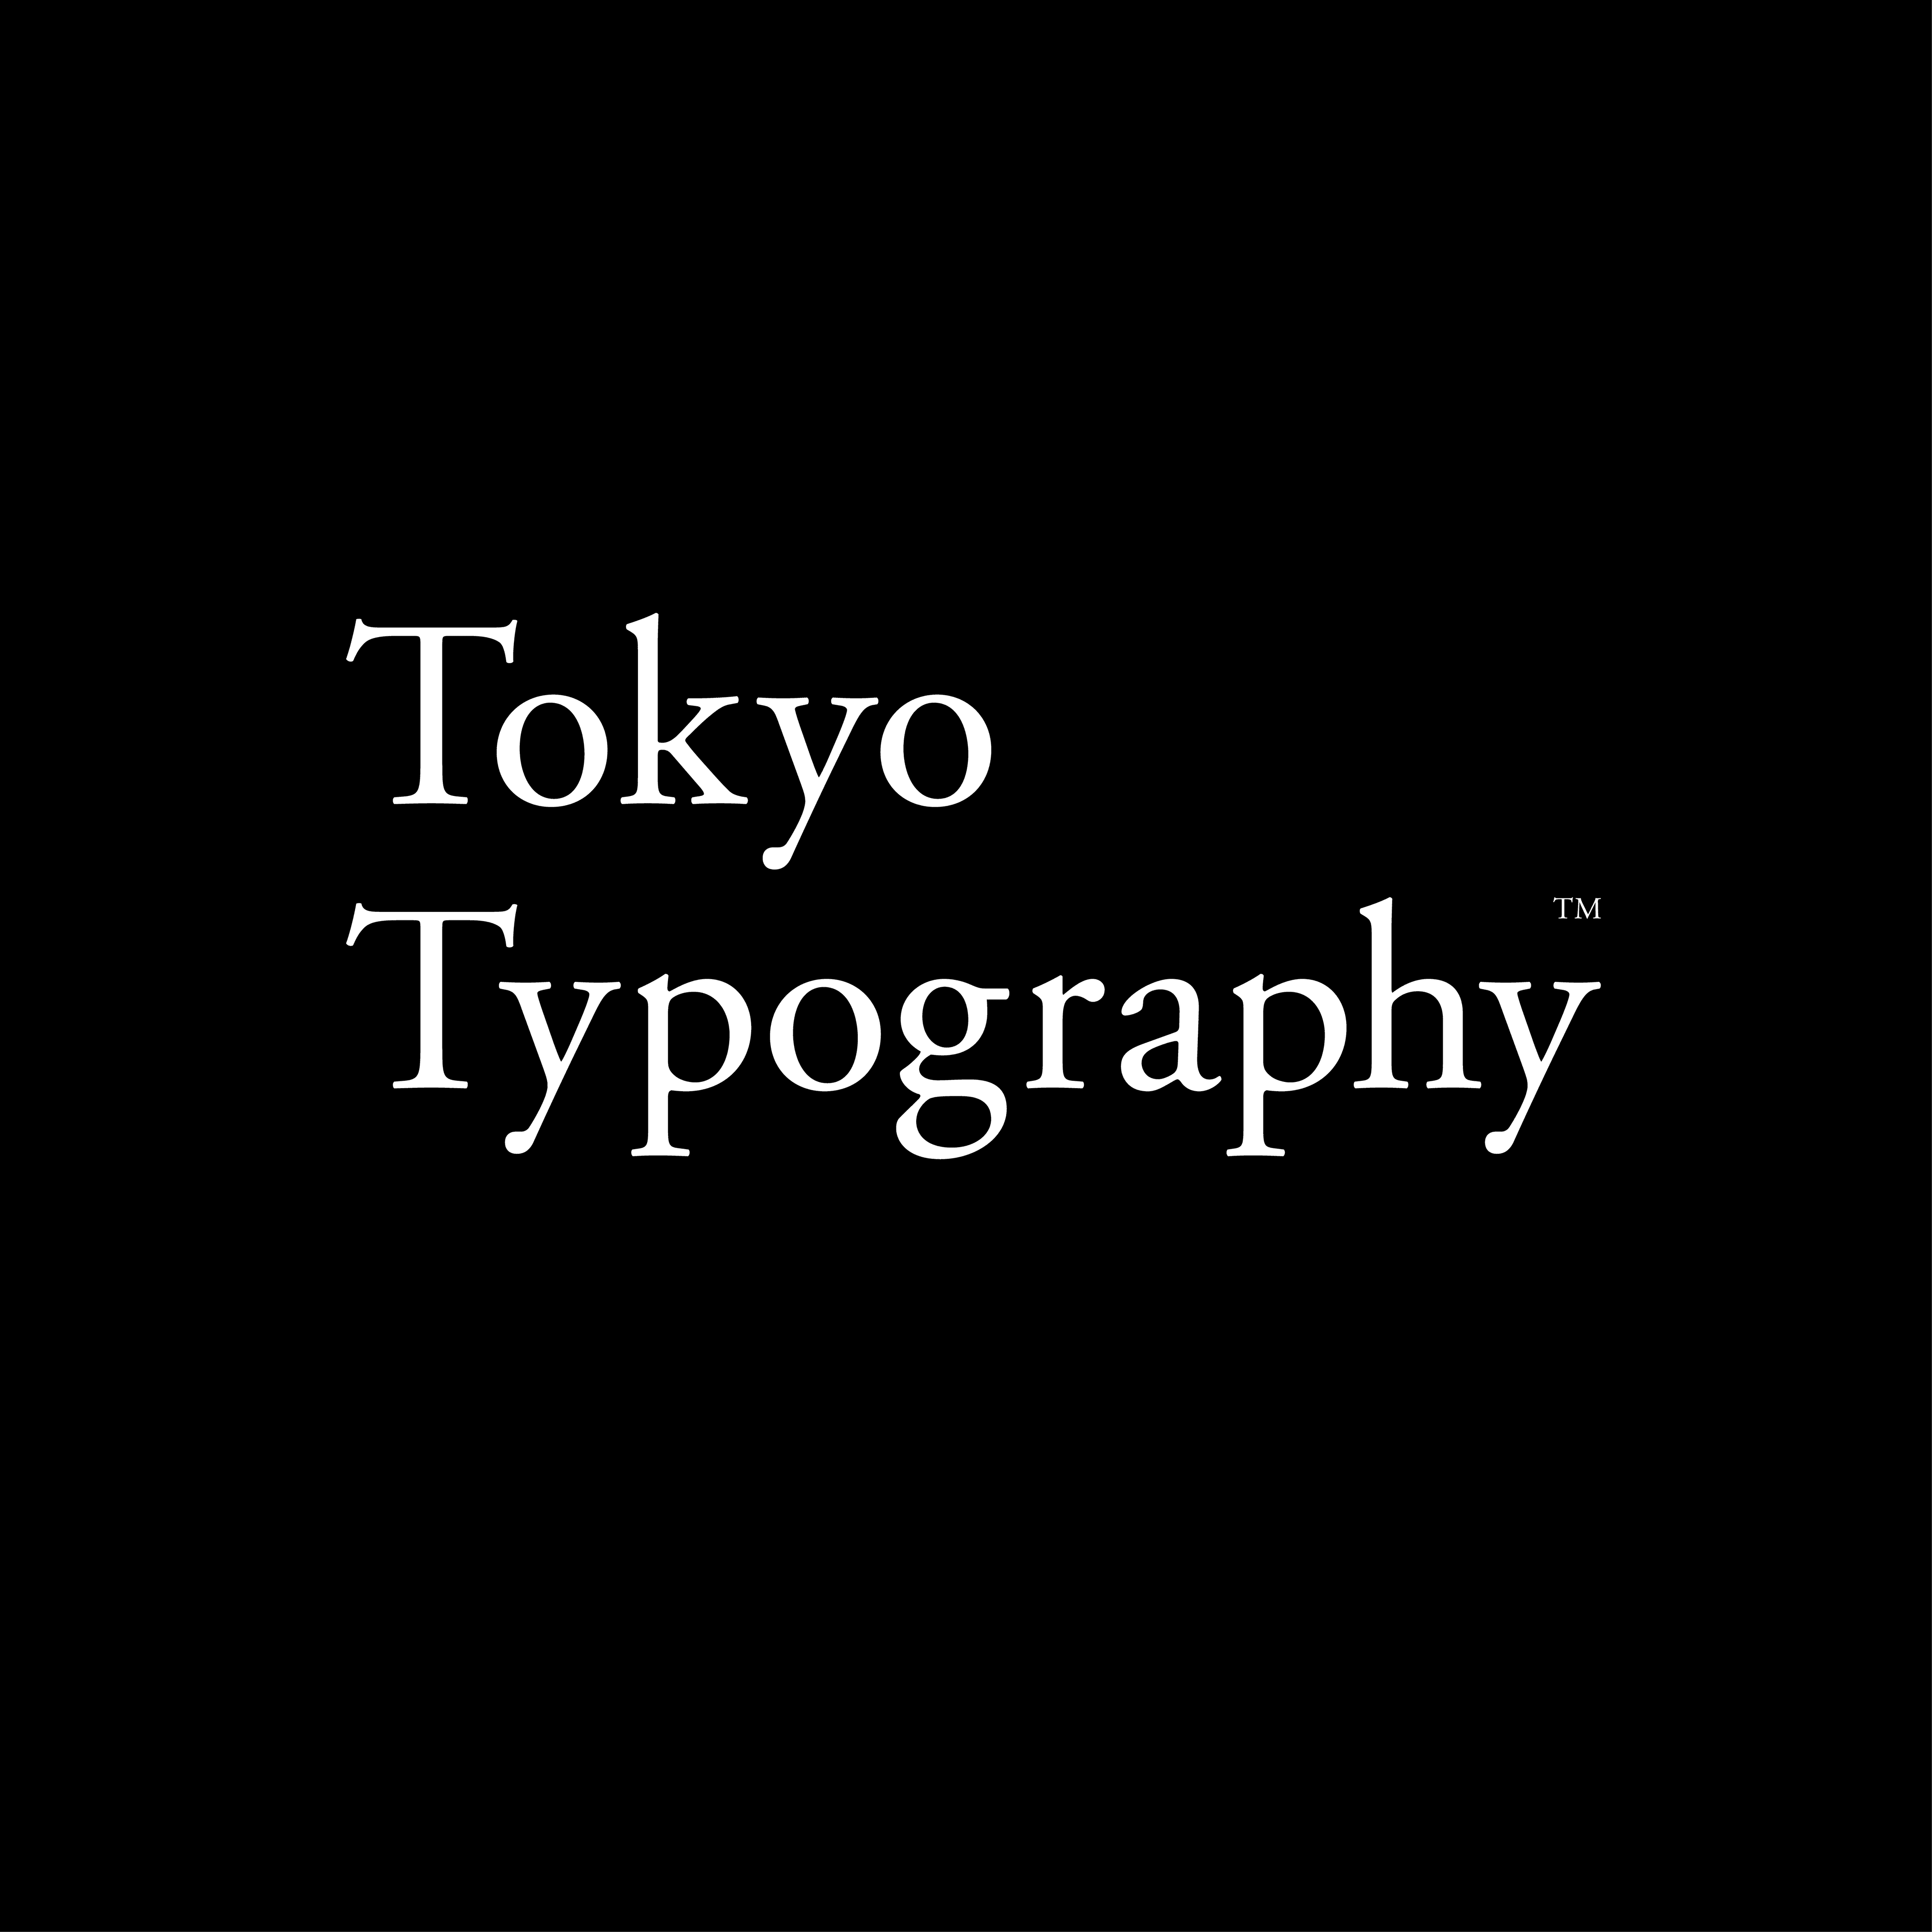 Tokyo Typography by atooshi and design